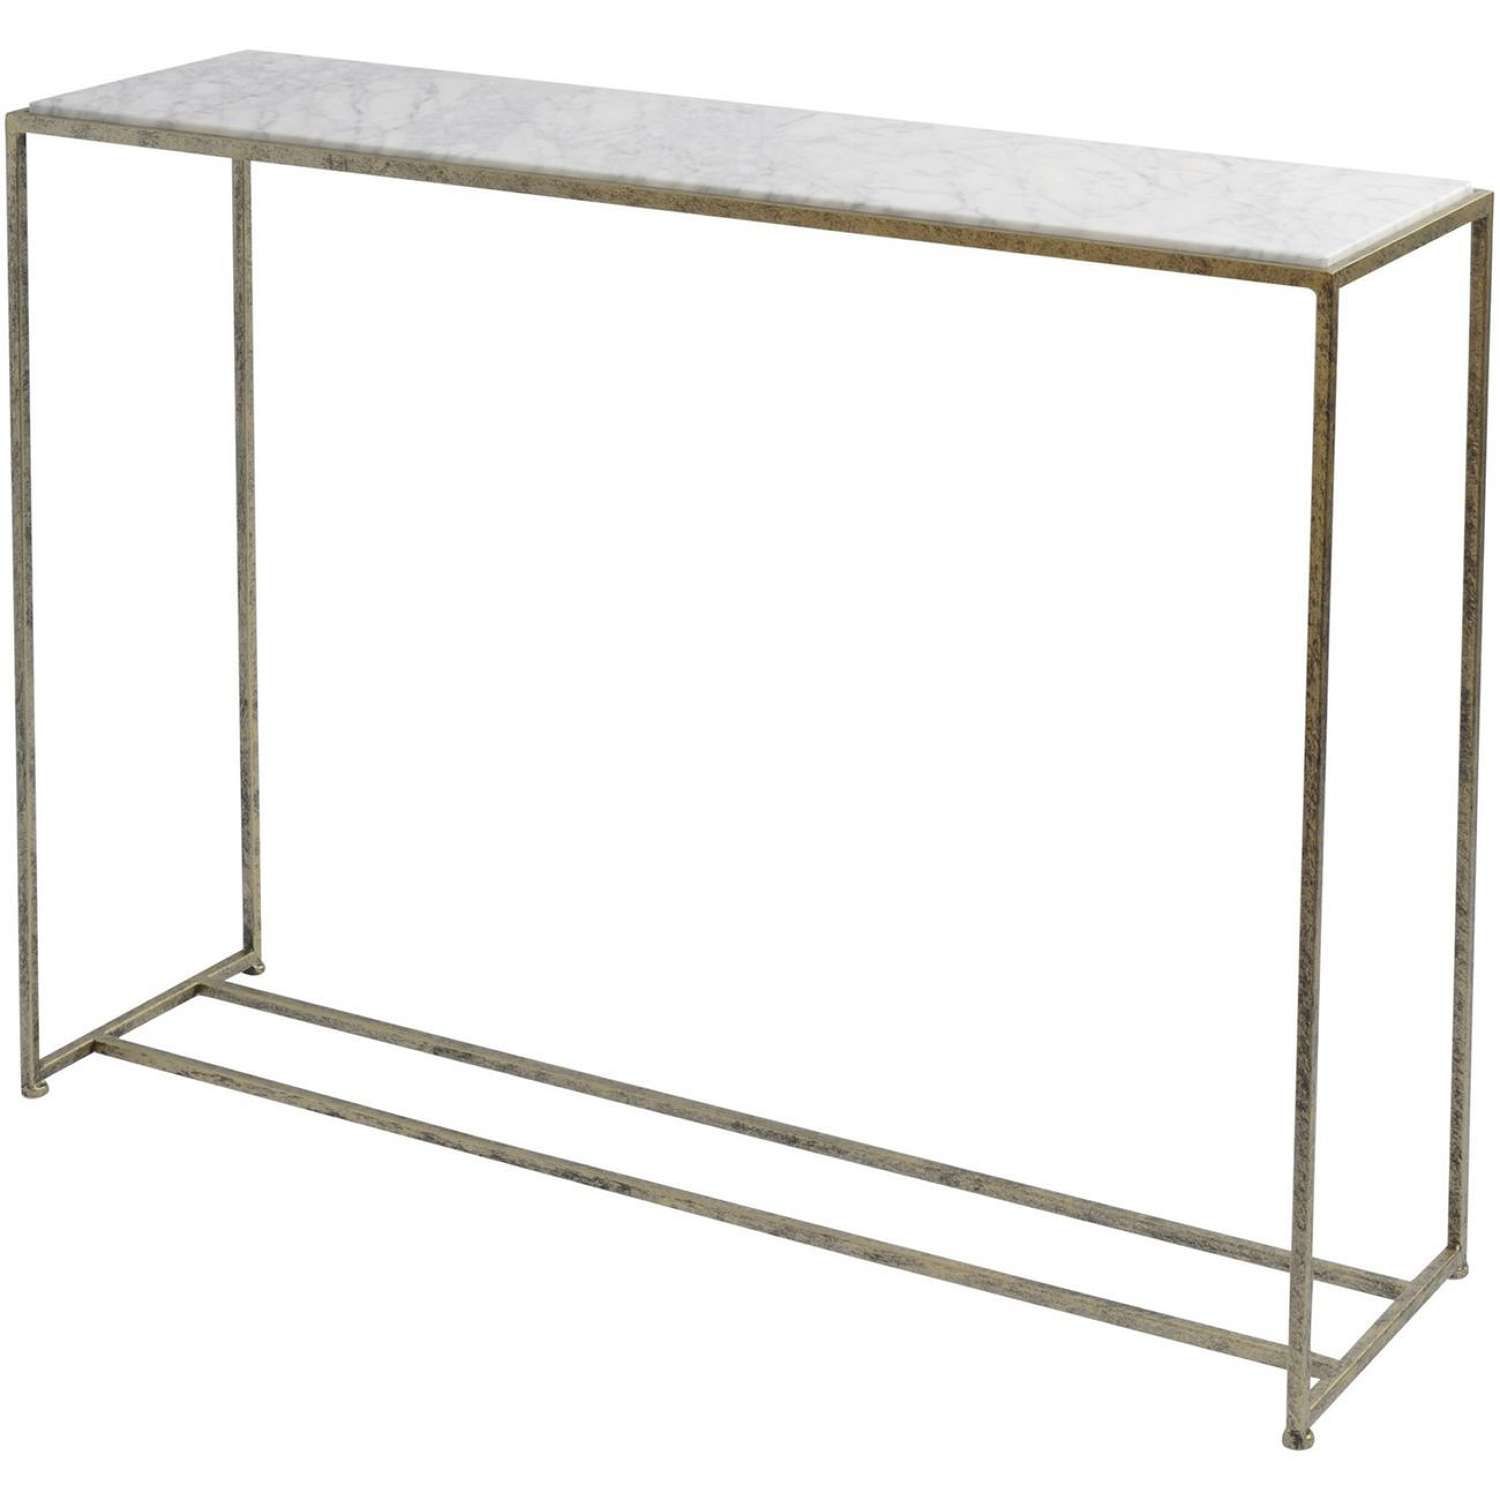 Gold Framed Console Table With White Marble Top Pertaining To White Marble Gold Metal Console Tables (View 10 of 20)